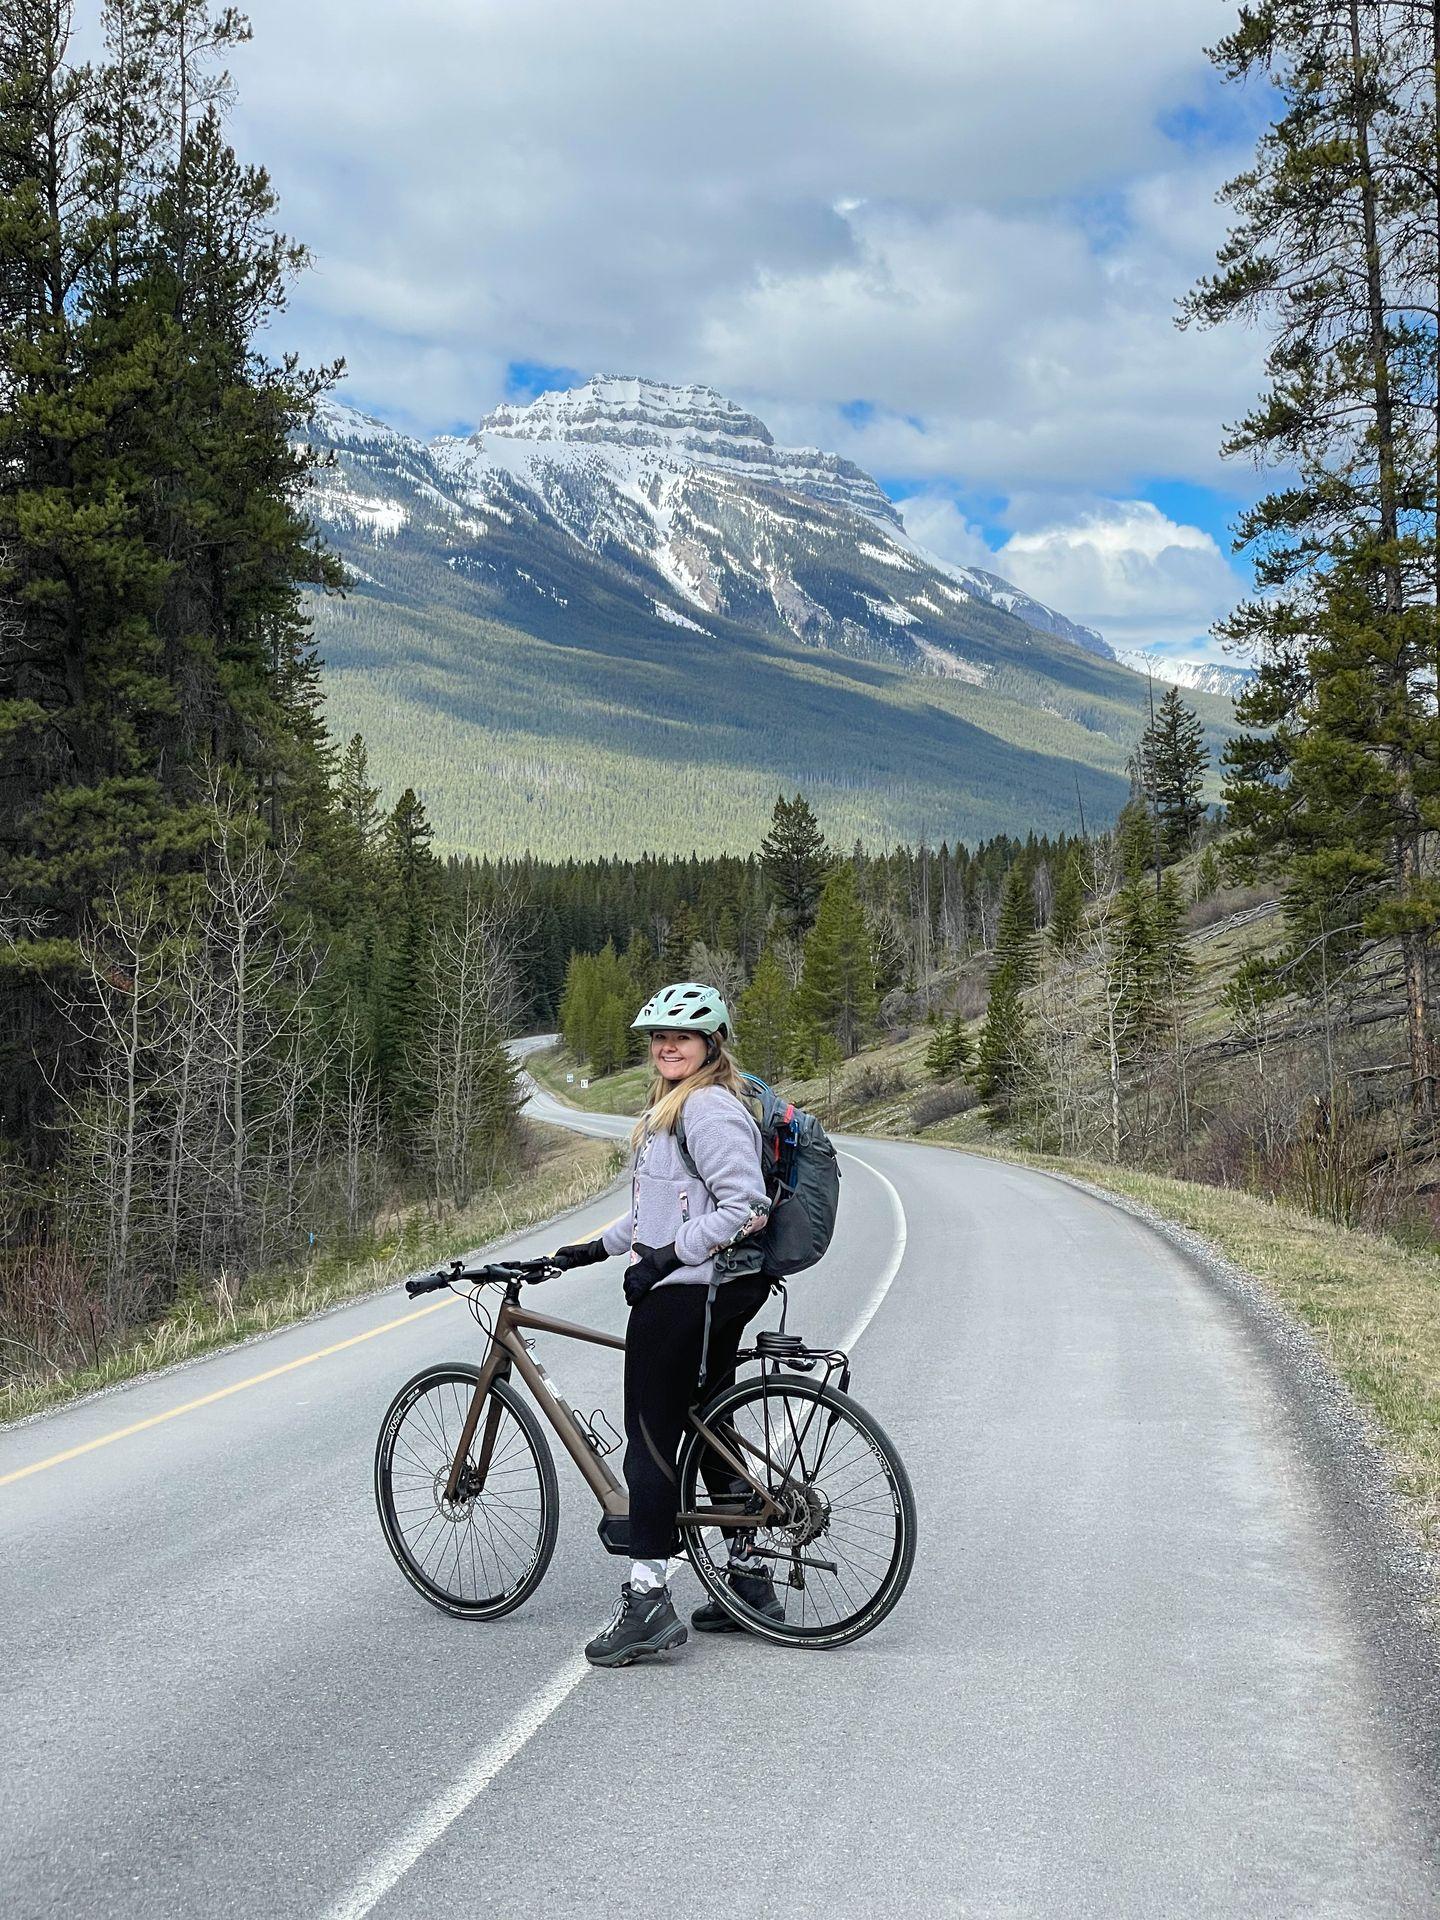 Lydia on a bike on the Bow Valley Parkway. The road curves downward and there is a tall mountain in the background.